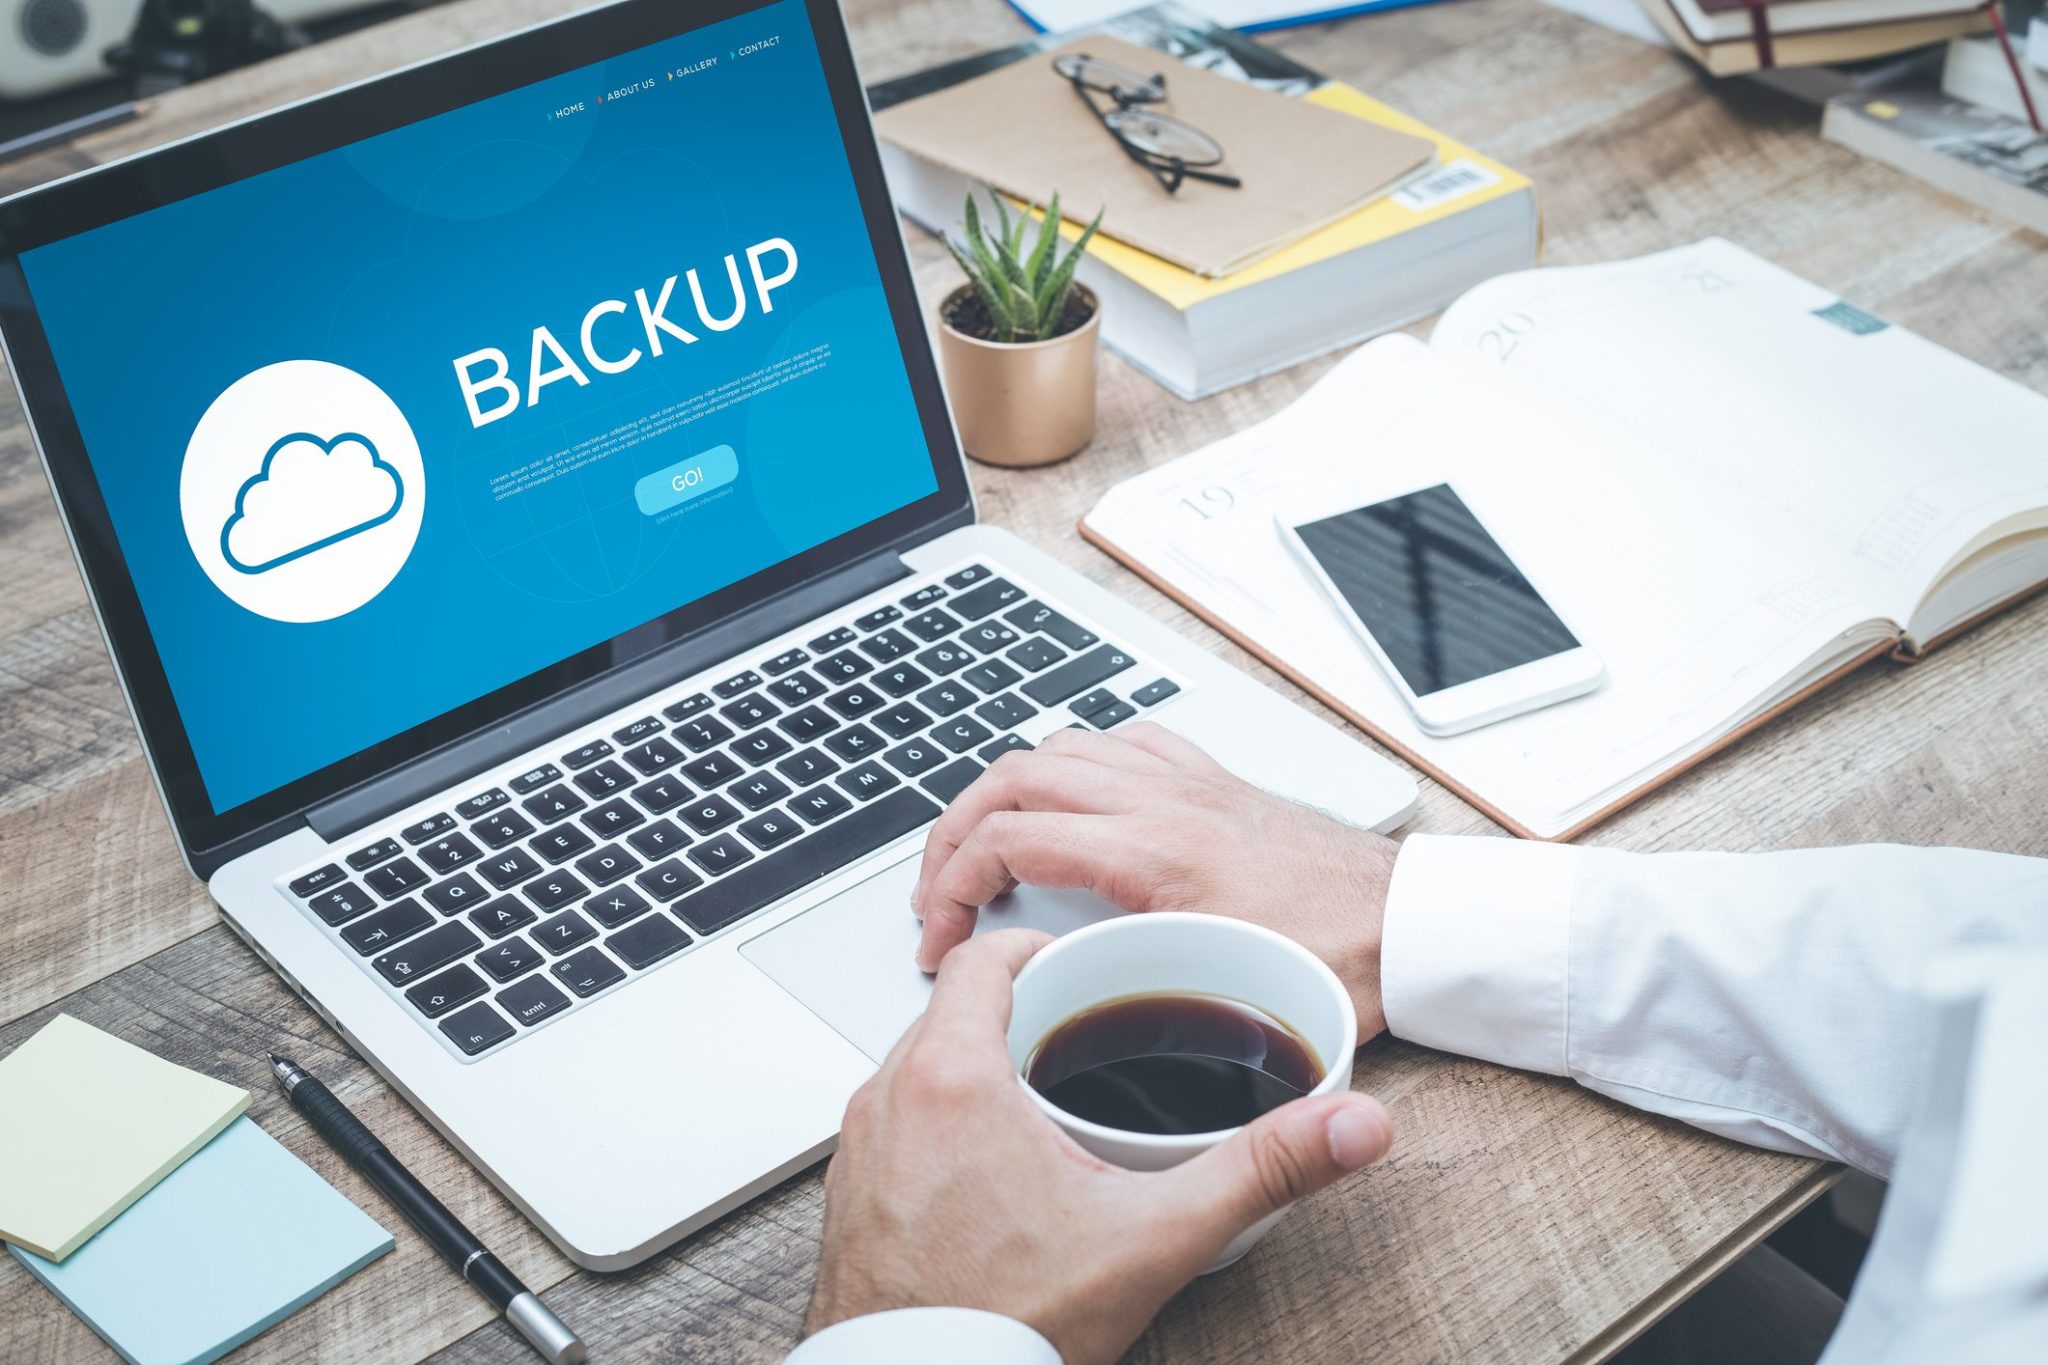 Use cloud backup to ensure business continuity with Azure disaster recovery